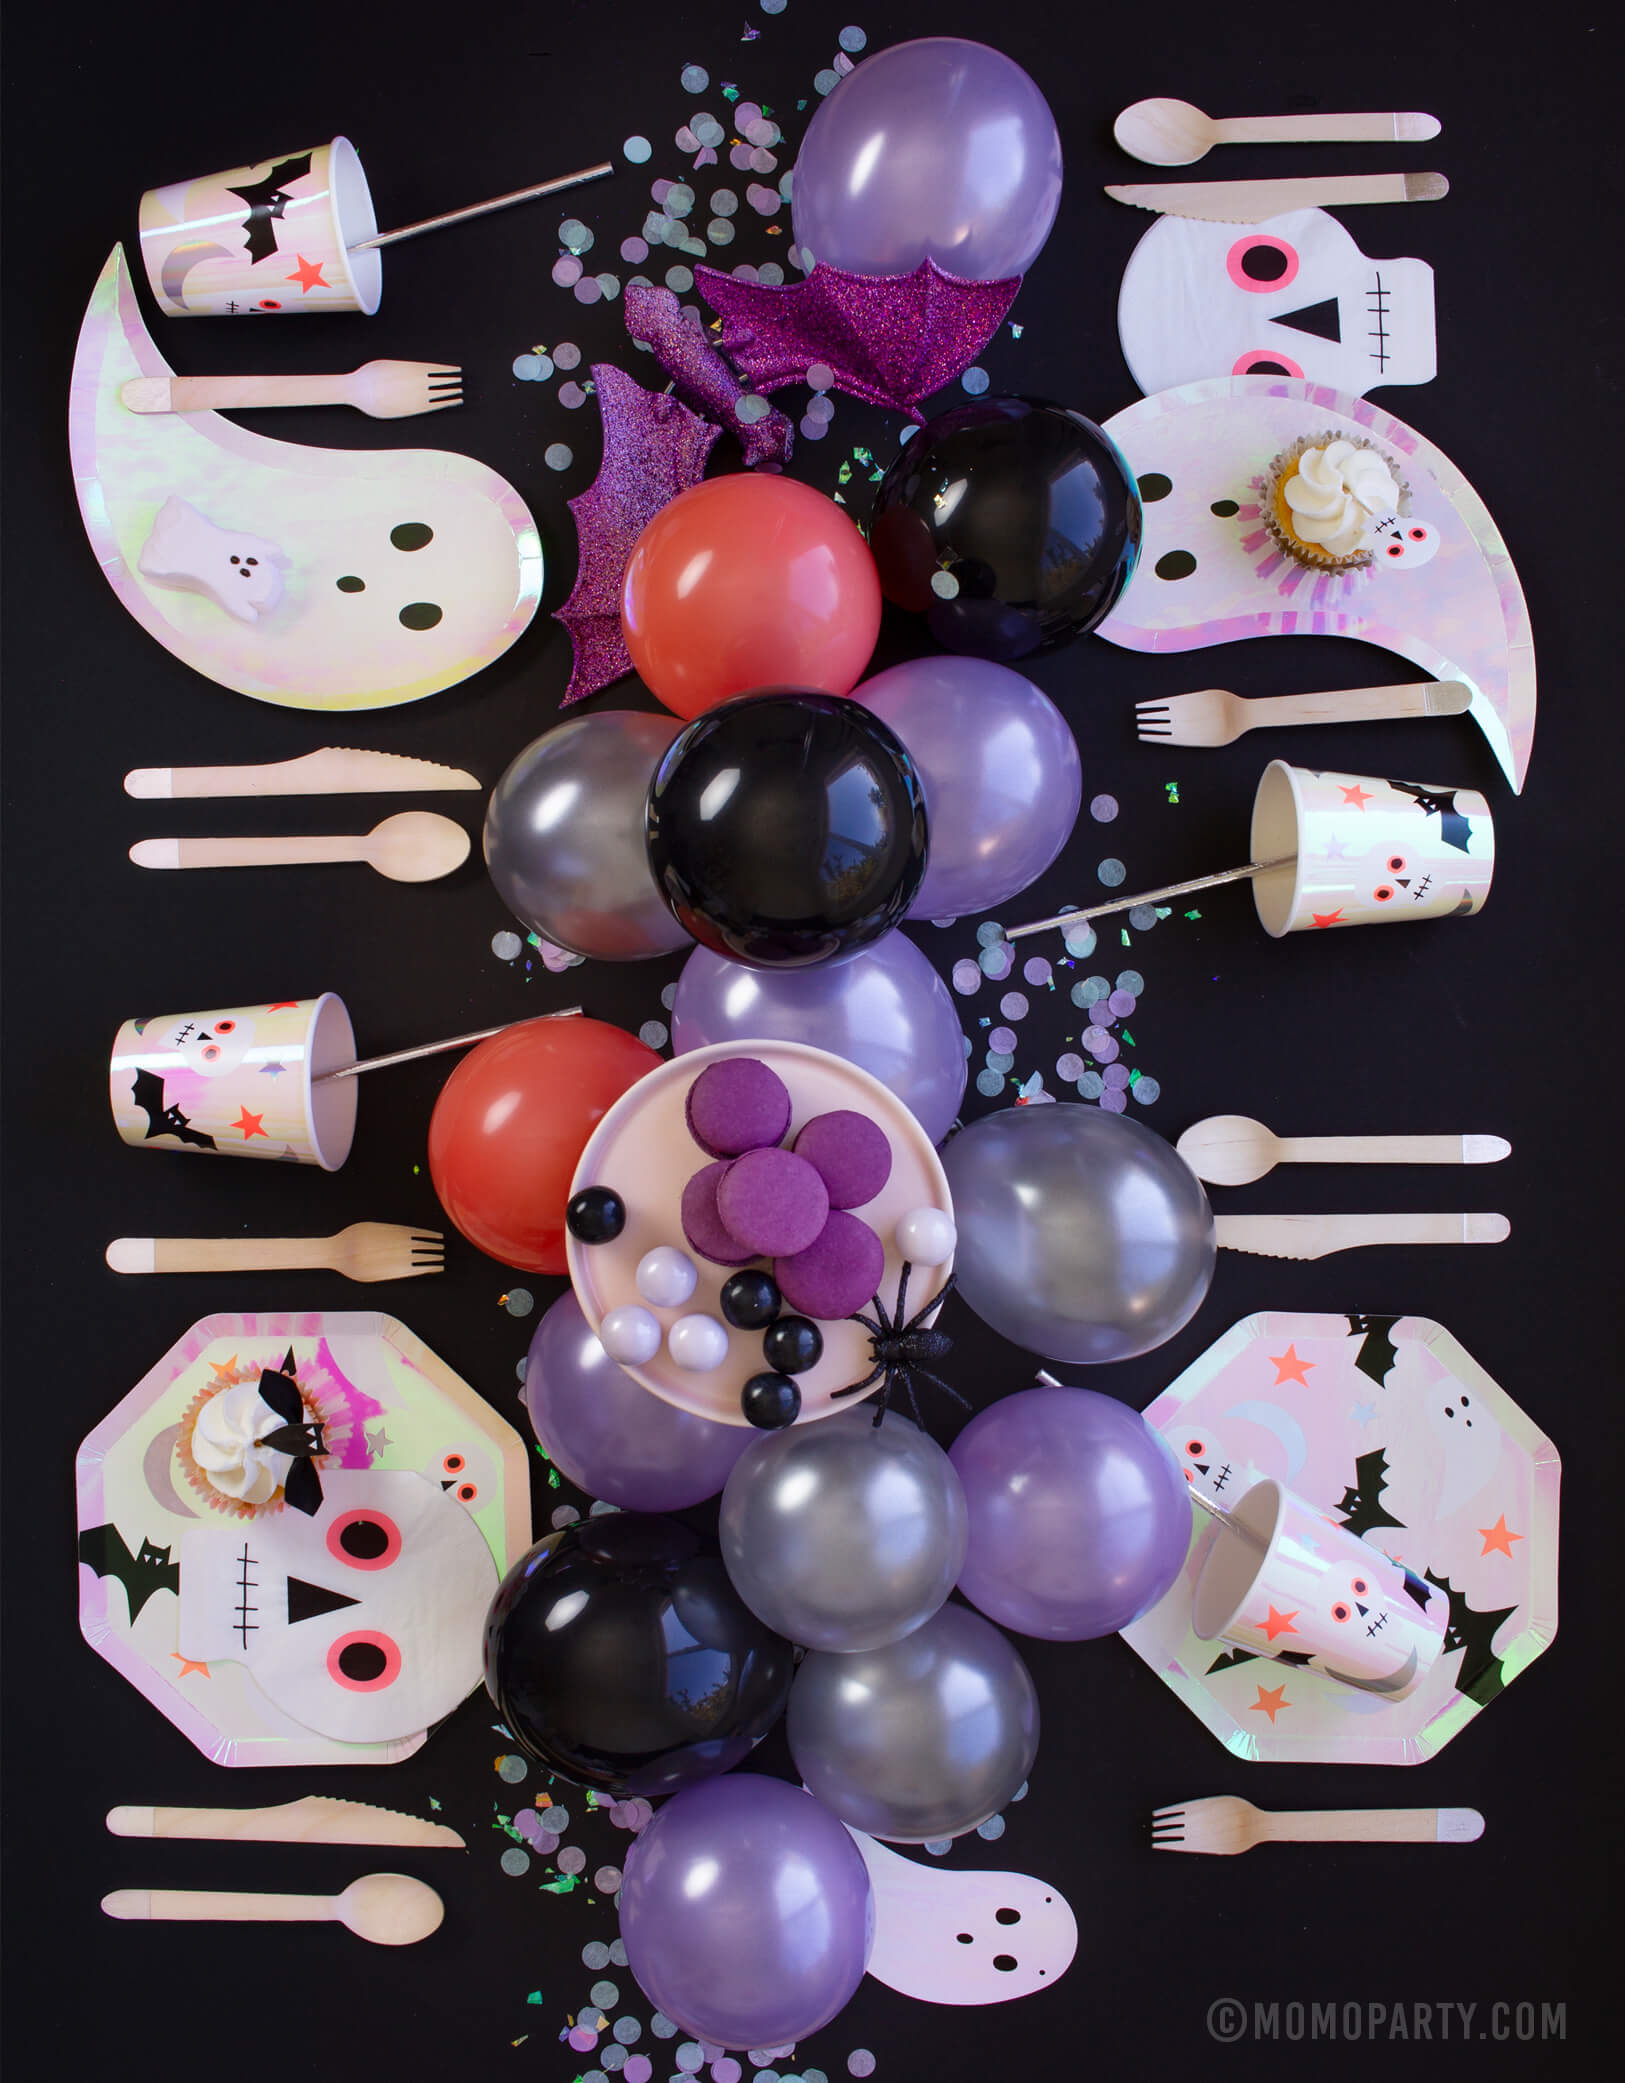 momo party kids 2019 Halloween party table set up plan for 4 people with MeriMeri Iridescent Ghost Plates,  Halloween Icons Side Plates, Cups, Confettis and Pear purple, coral, sliver, black balloons, pink cupcake stand with macrons as centerpiece 